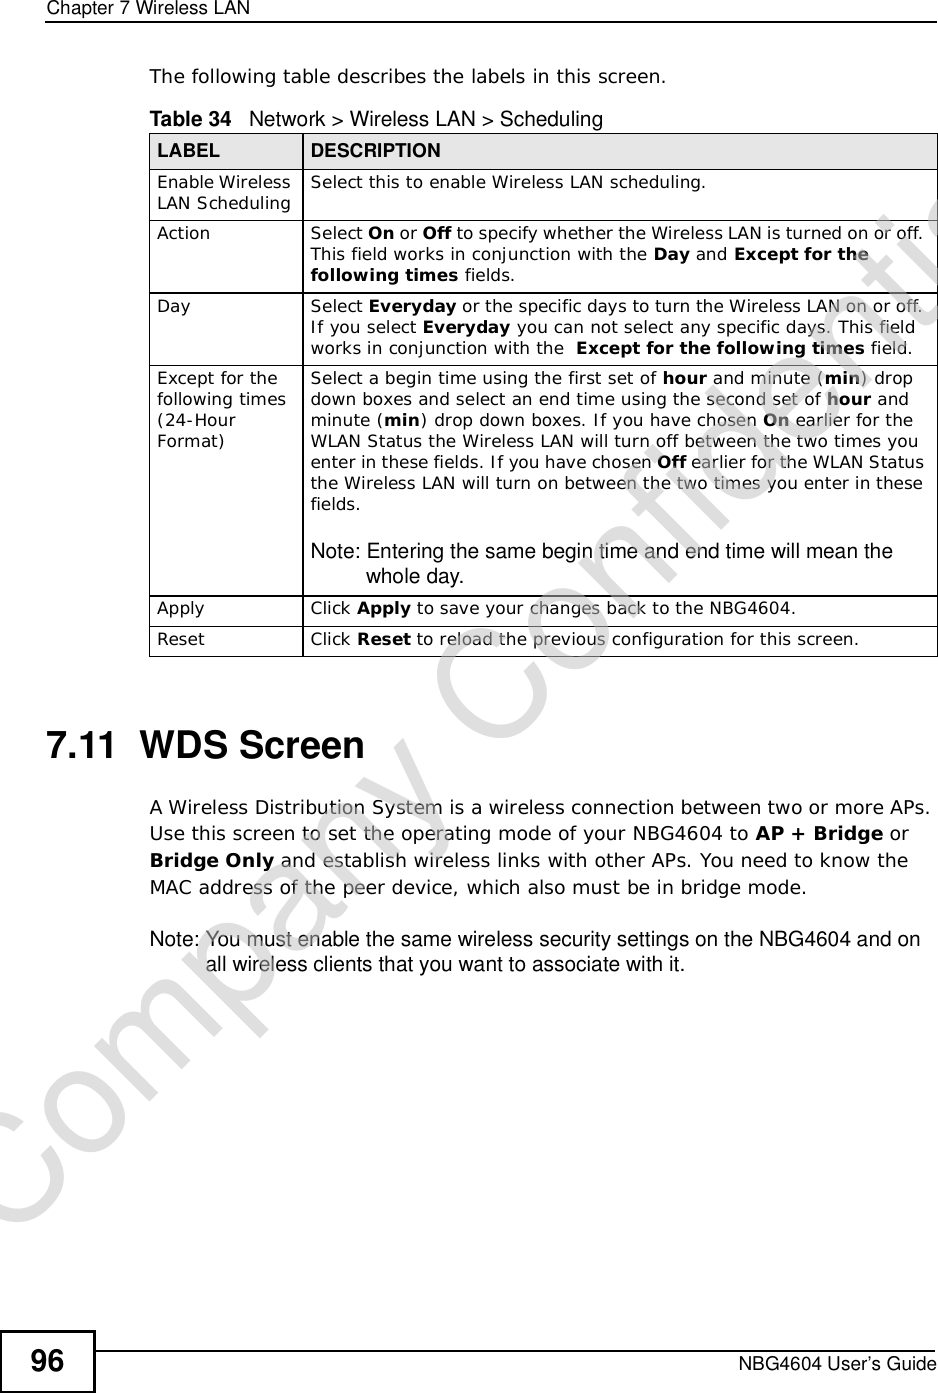 Chapter 7Wireless LANNBG4604 User’s Guide96The following table describes the labels in this screen.7.11  WDS ScreenA Wireless Distribution System is a wireless connection between two or more APs. Use this screen to set the operating mode of your NBG4604 to AP + Bridge or Bridge Only and establish wireless links with other APs. You need to know the MAC address of the peer device, which also must be in bridge mode. Note: You must enable the same wireless security settings on the NBG4604 and on all wireless clients that you want to associate with it. Table 34   Network &gt; Wireless LAN &gt; SchedulingLABEL DESCRIPTIONEnable Wireless LAN Scheduling Select this to enable Wireless LAN scheduling.Action Select On or Off to specify whether the Wireless LAN is turned on or off. This field works in conjunction with the Day and Except for the following times fields.Day Select Everyday or the specific days to turn the Wireless LAN on or off. If you select Everyday you can not select any specific days. This field works in conjunction with the  Except for the following times field.Except for the following times (24-HourFormat)Select a begin time using the first set of hour and minute (min) drop down boxes and select an end time using the second set of hour and minute (min) drop down boxes. If you have chosen On earlierfor the WLAN Status the Wireless LAN will turn off between the two times you enter in these fields. If you have chosen Off earlierfor the WLAN Status the Wireless LAN will turn on between the two times you enter in these fields. Note: Entering the same begin time and end time will mean the whole day.Apply Click Apply to save your changes back to the NBG4604.Reset Click Reset to reload the previous configuration for this screen.Company Confidential